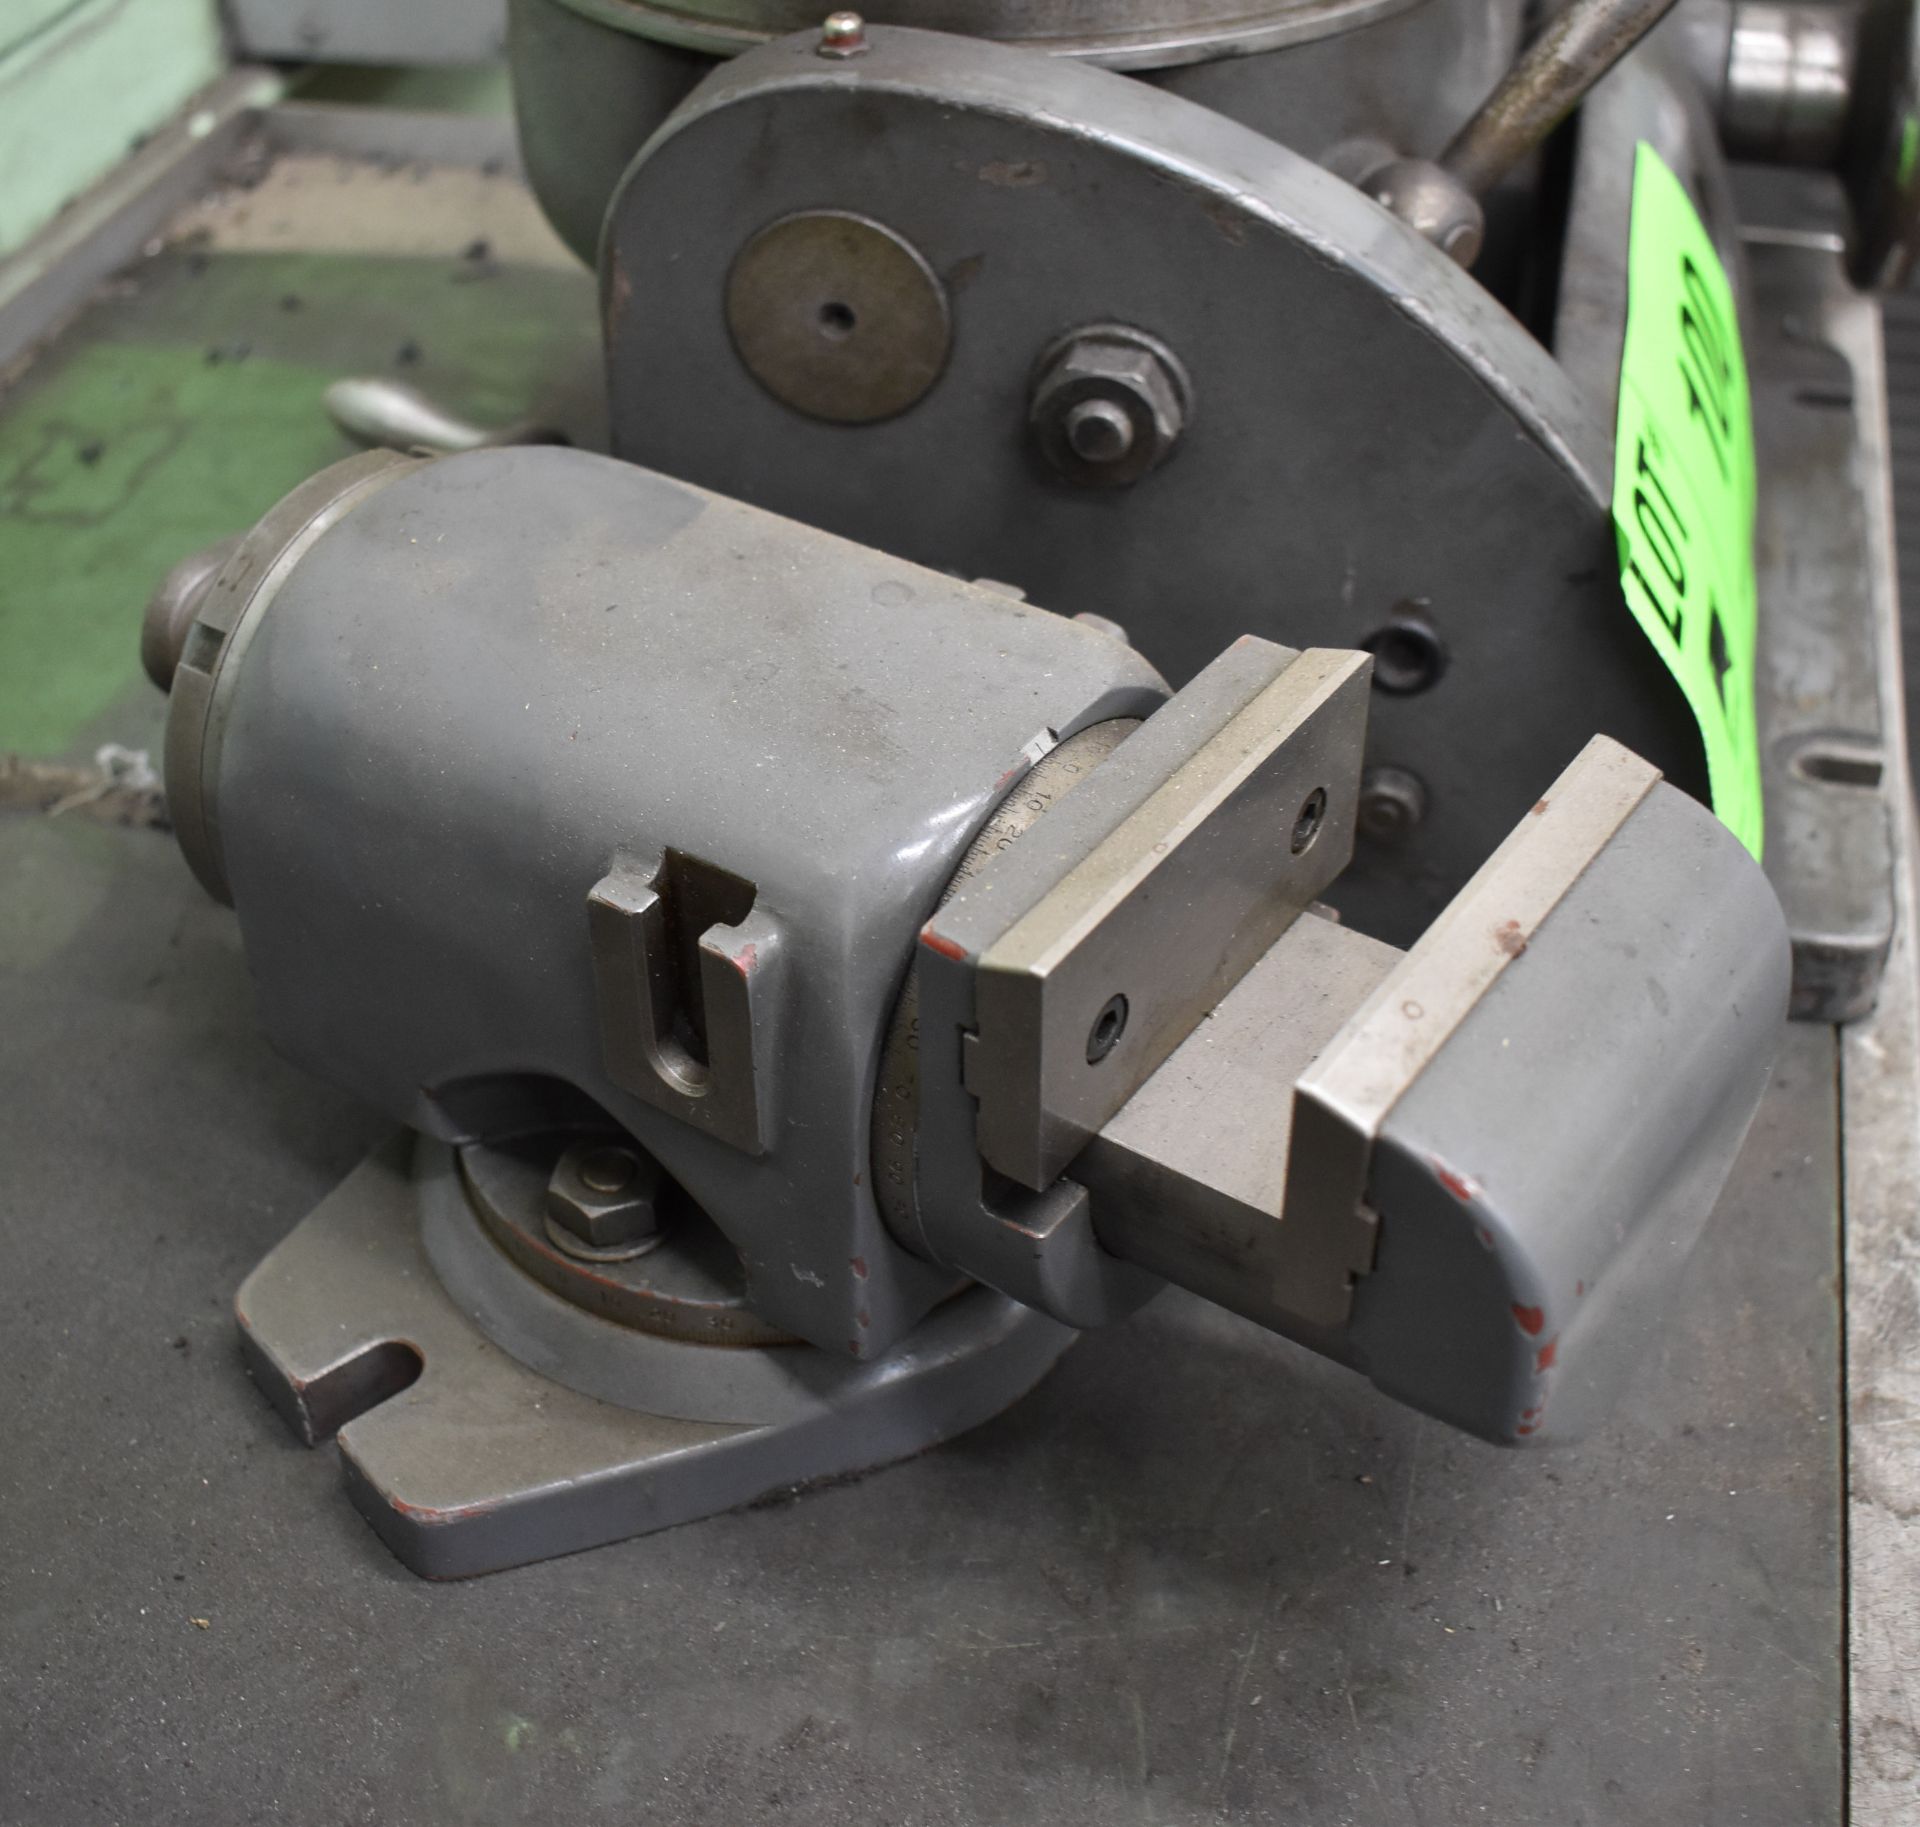 8" ROTARY FIXTURE PLATE WITH VISE, S/N: N/A - Image 2 of 3